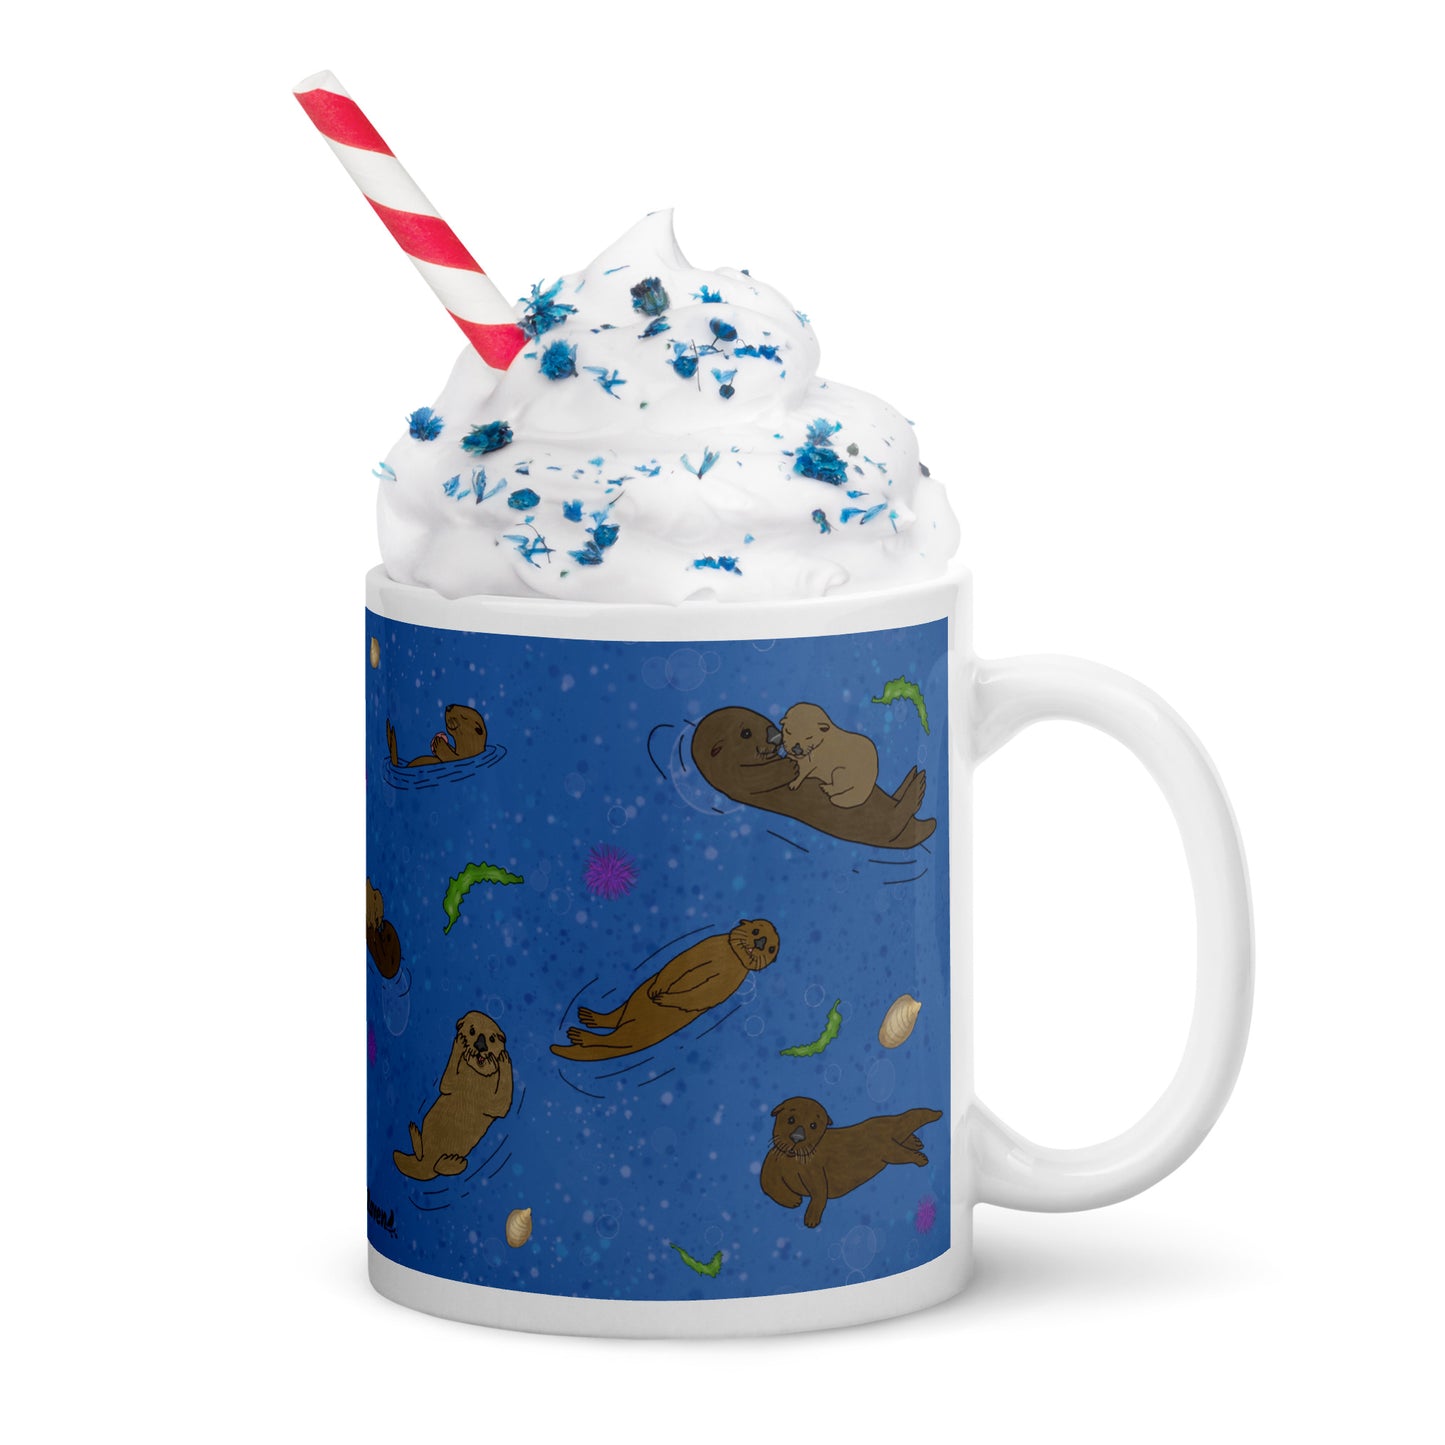 11 ounce white ceramic mug with sea otters on an ocean blue background. Mug is microwave and dishwasher safe. Shown with whipped cream, sprinkles, and a straw.